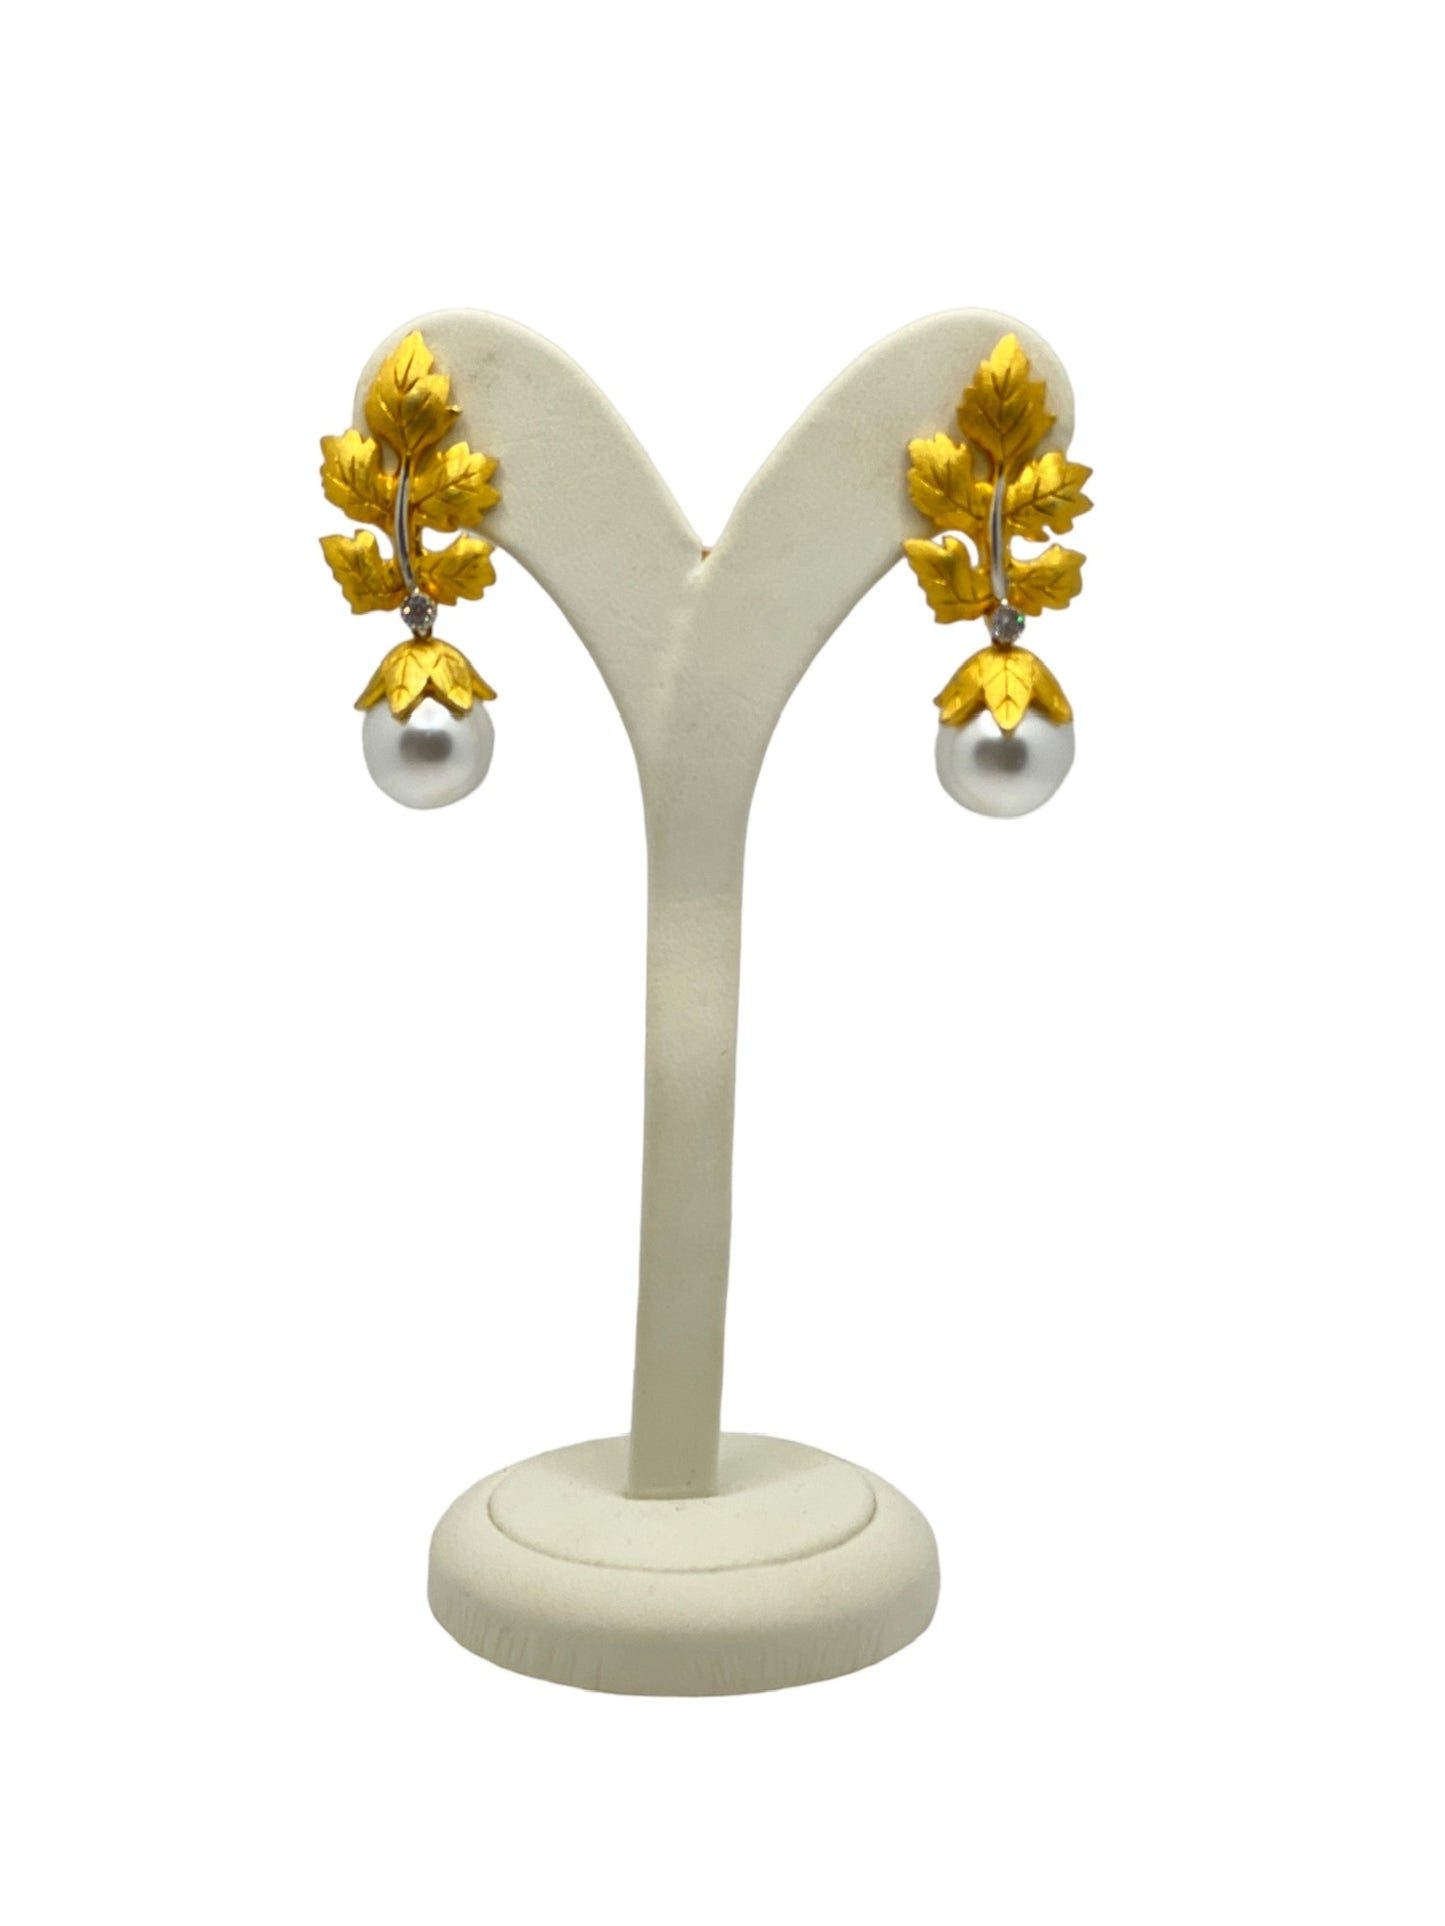 Gold and Pearl Leave Earrings